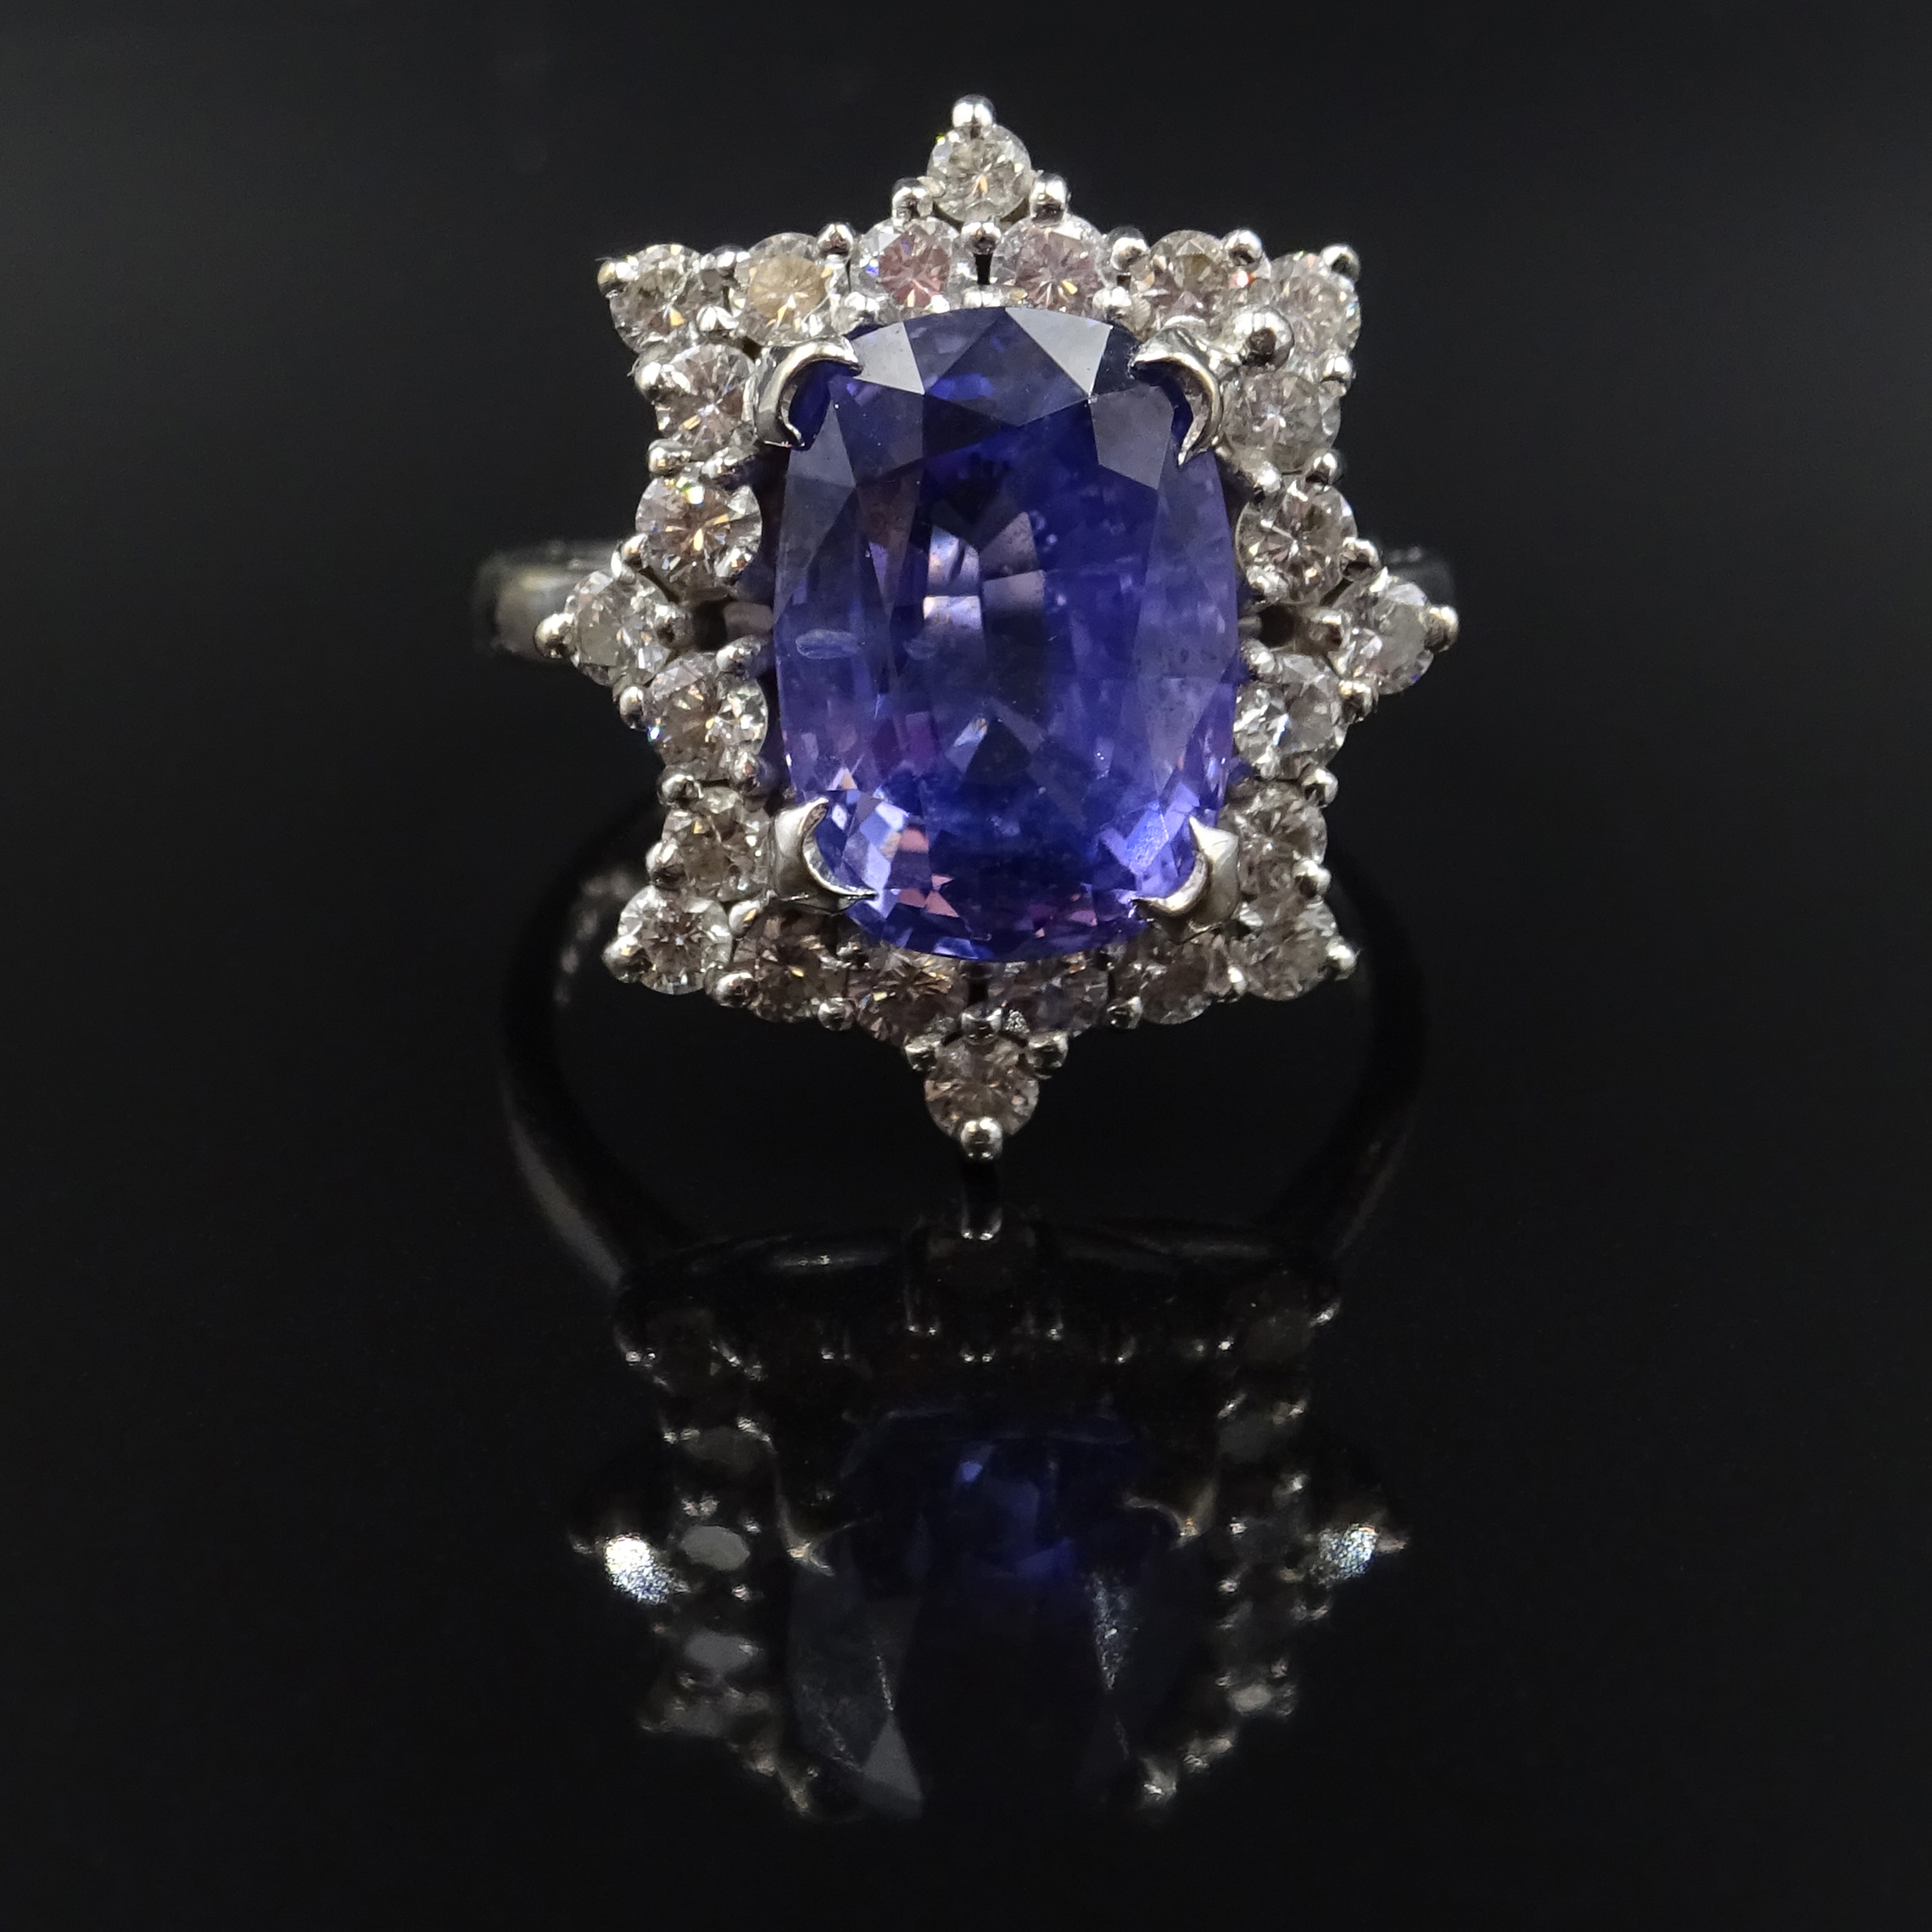 White gold emerald cut purple sapphire and diamond cluster ring, - Image 3 of 7